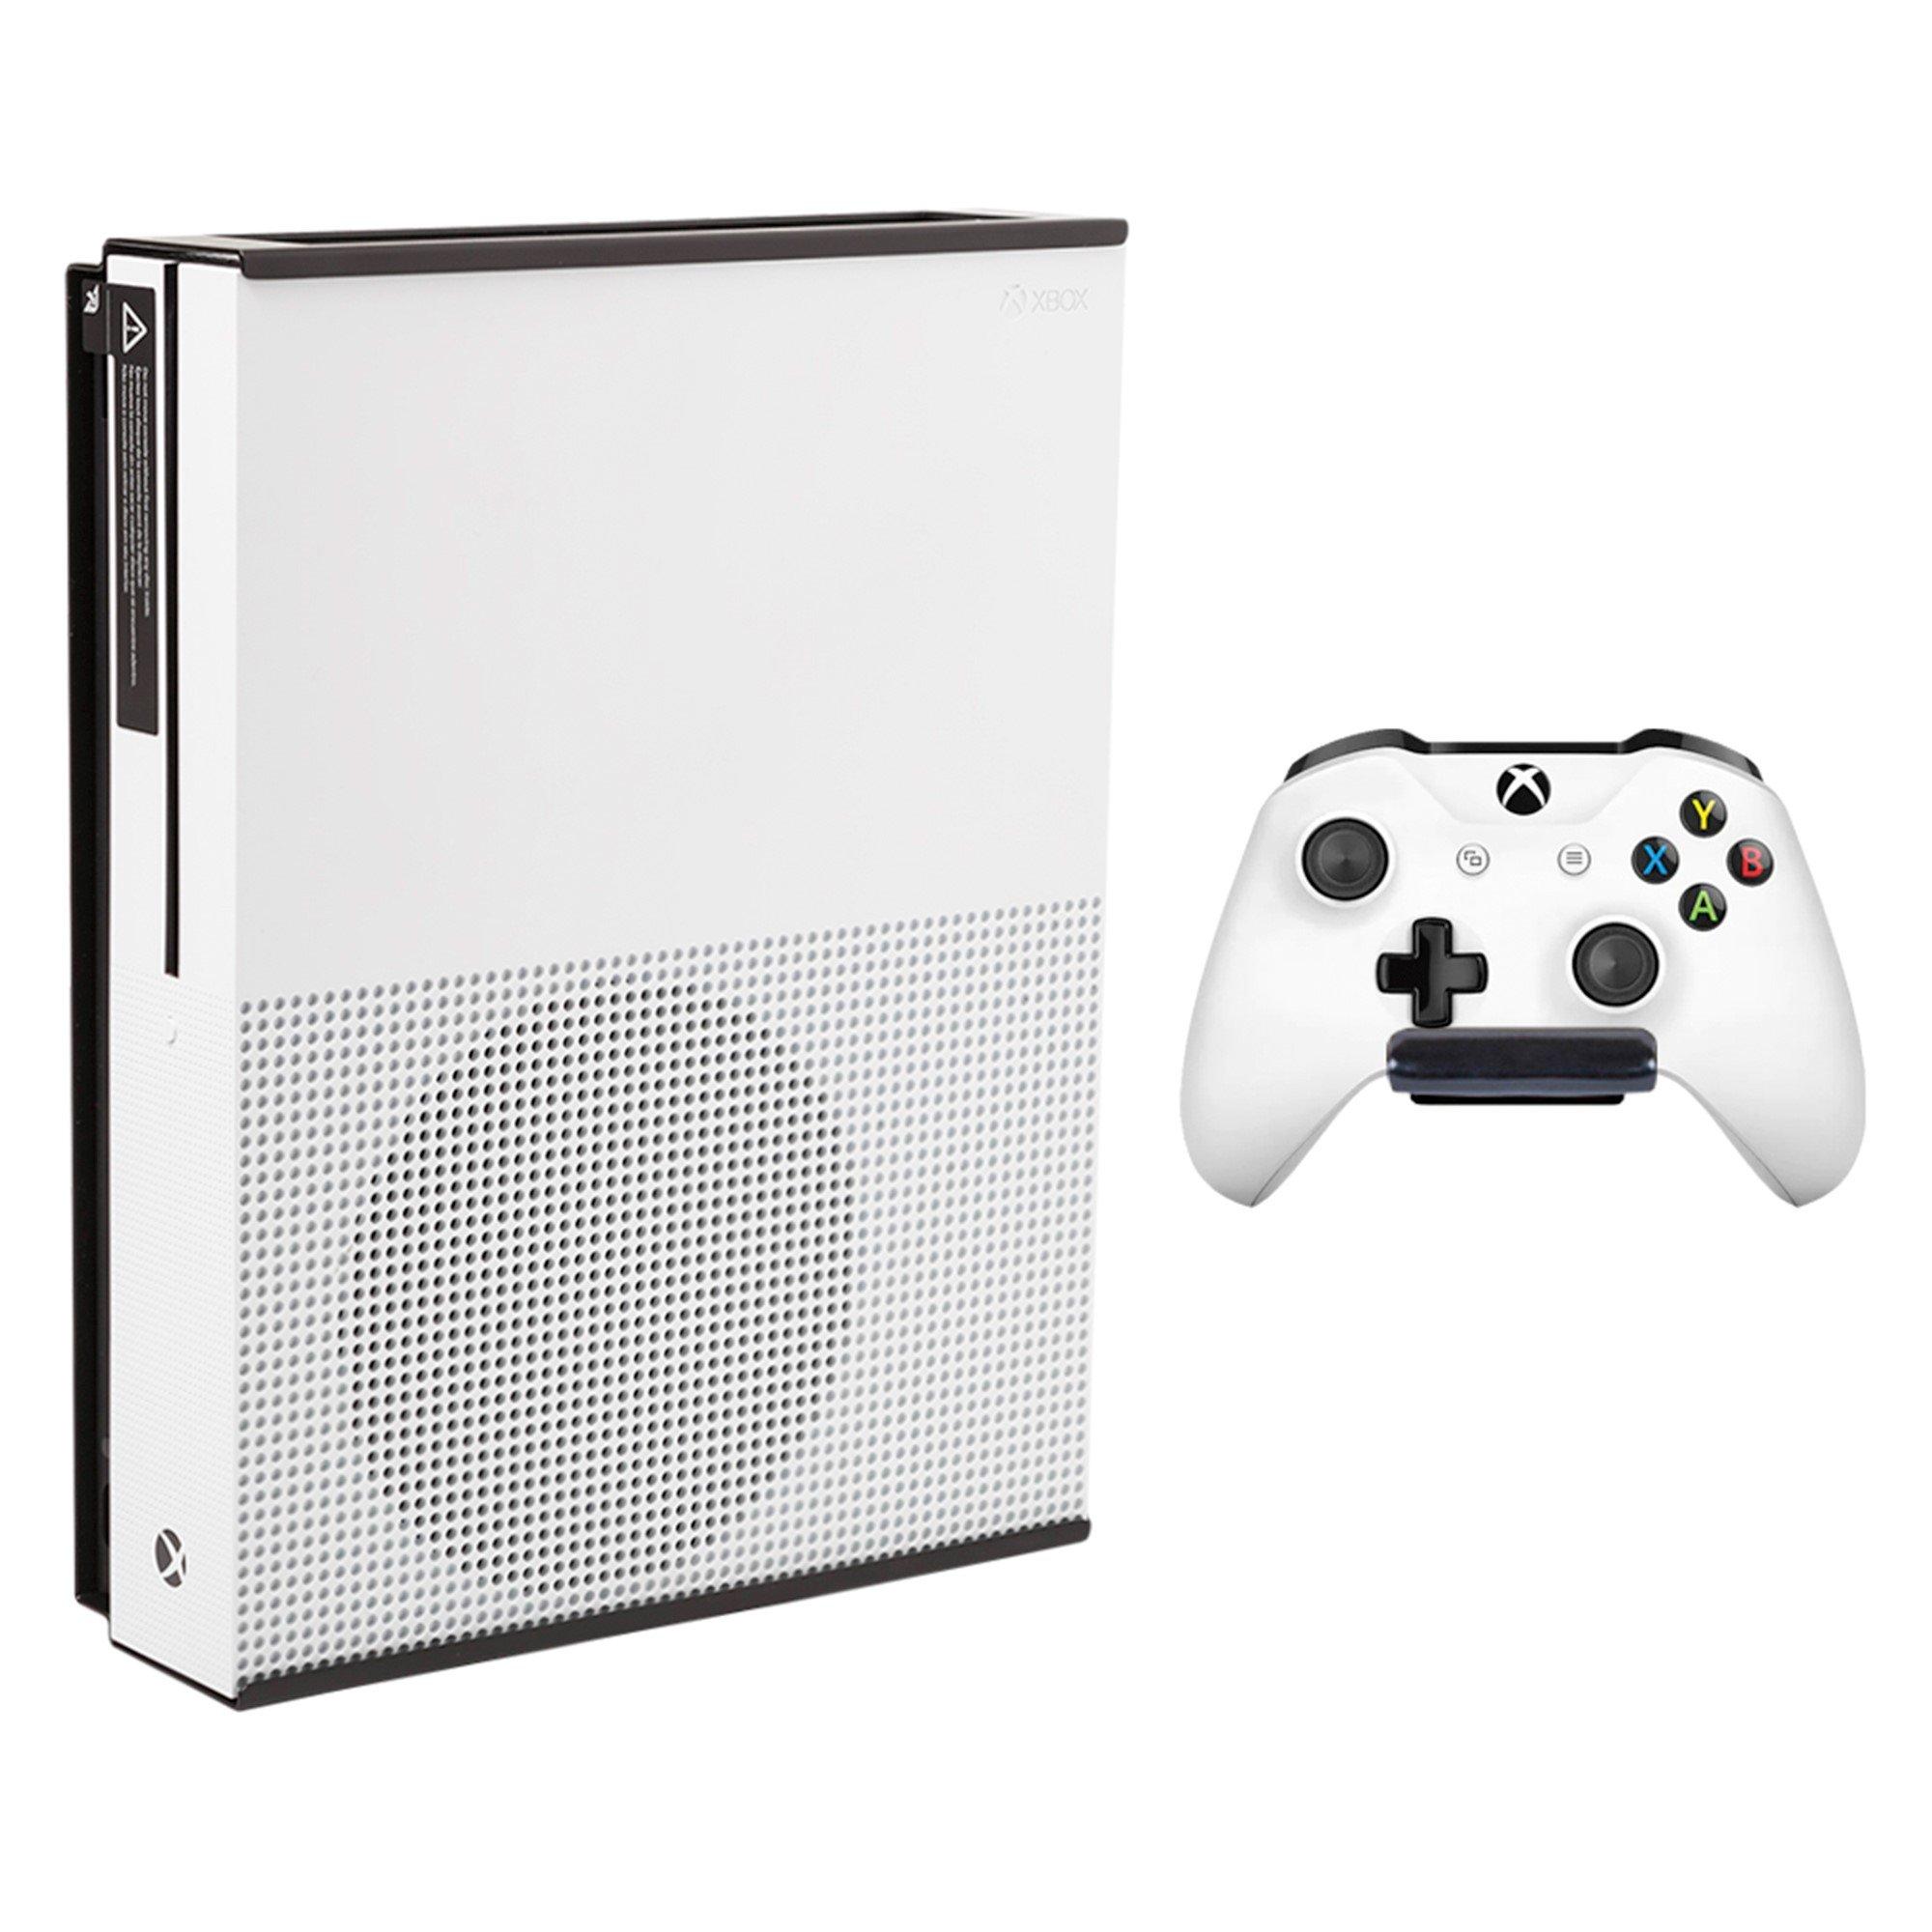 xbox one s price at gamestop